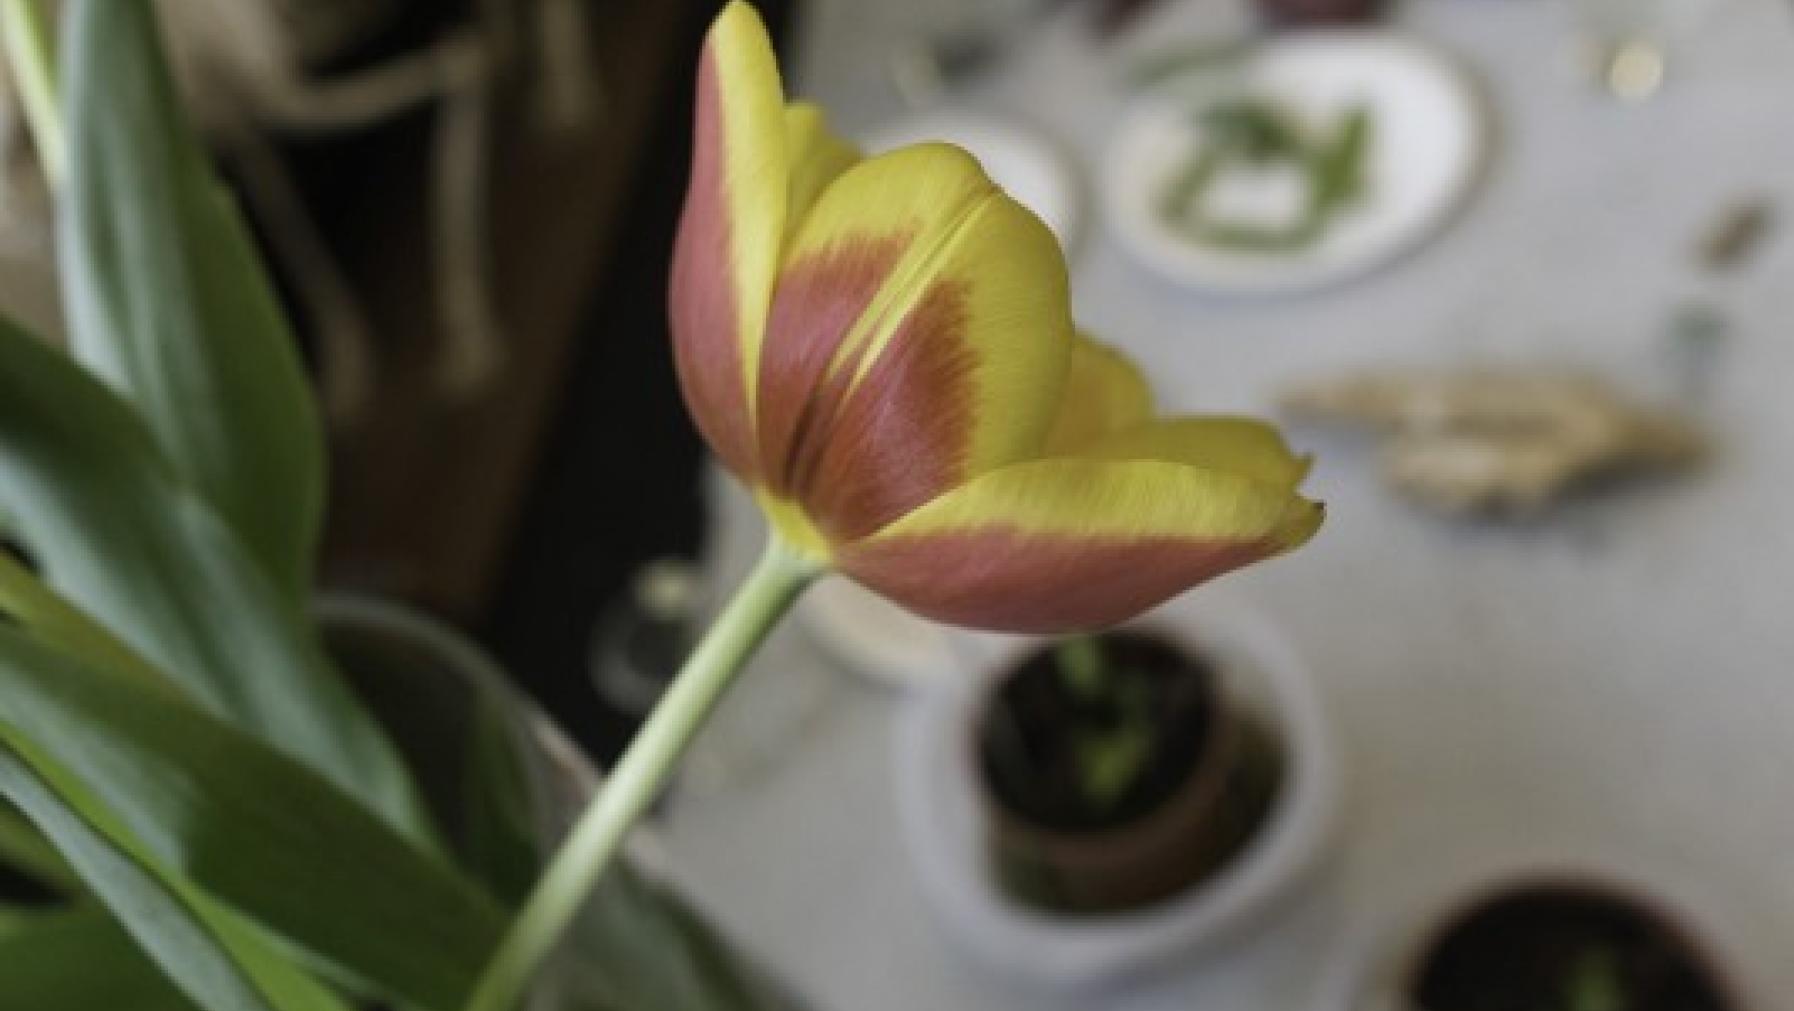 A tulip flower in a vase